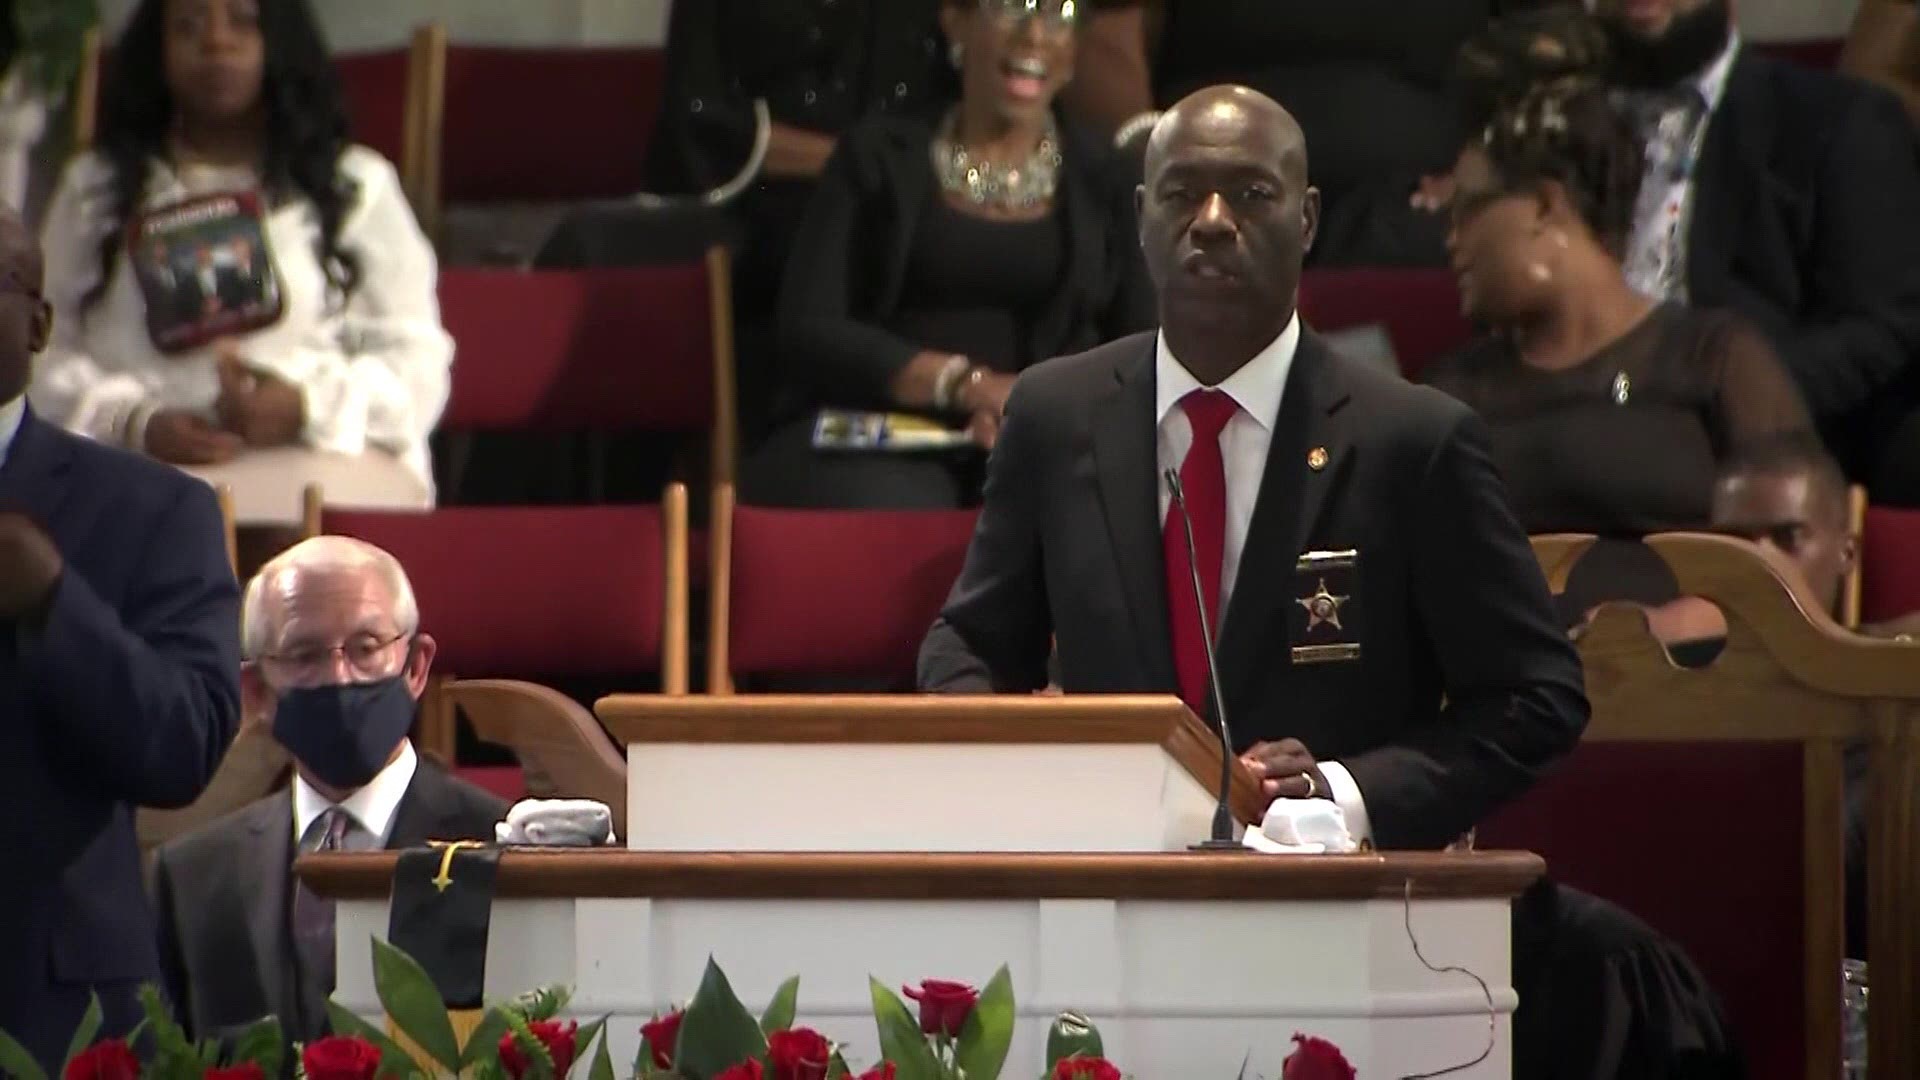 A funeral service was held for George Floyd in his hometown of Raeford, North Carolina.